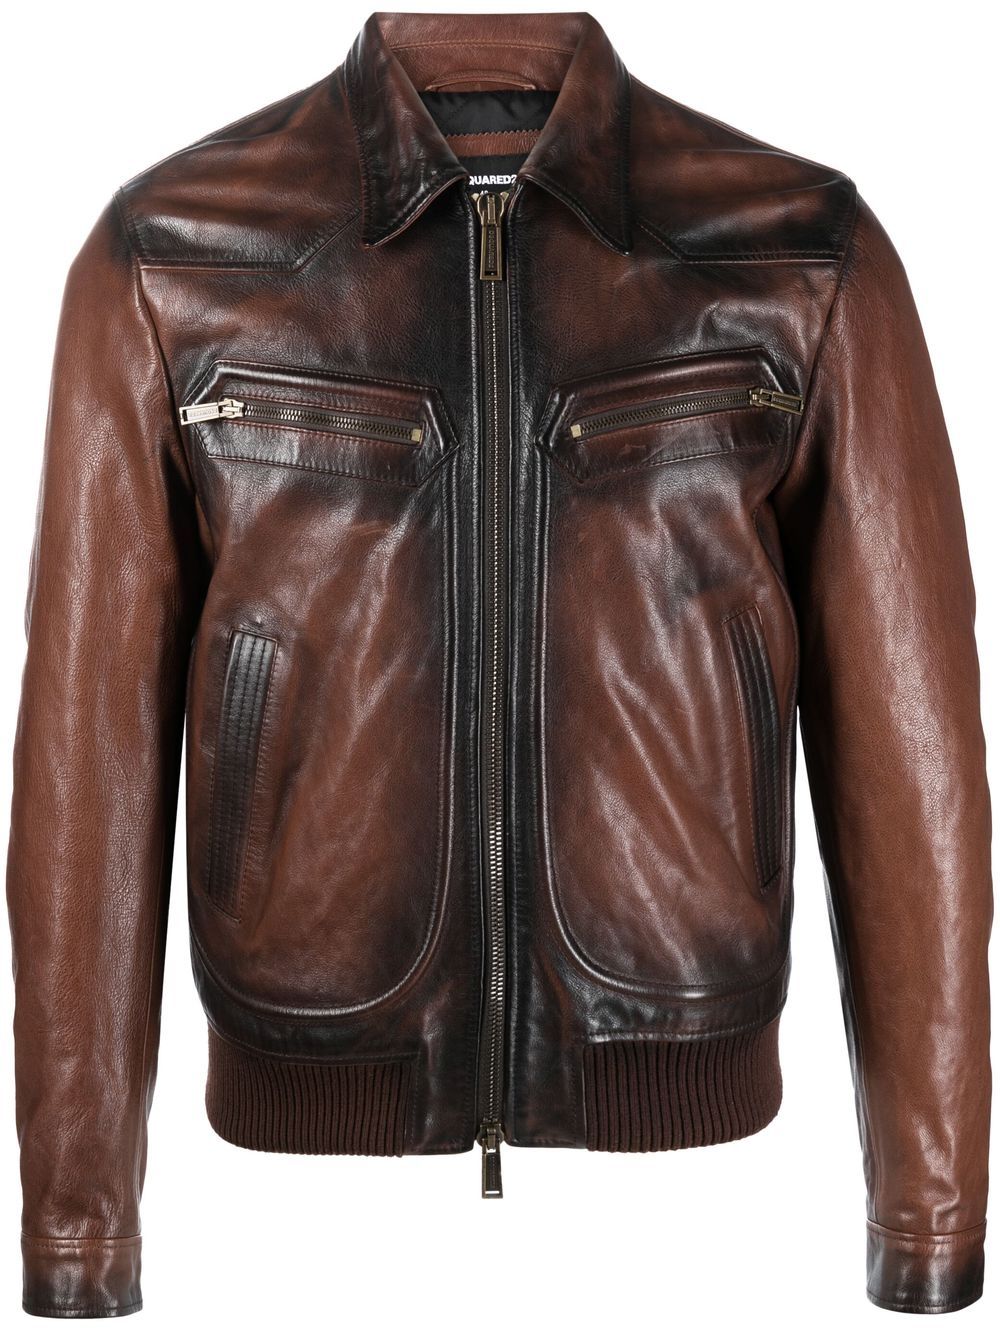 Dsquared2 faded-effect leather jacket - Braun von Dsquared2